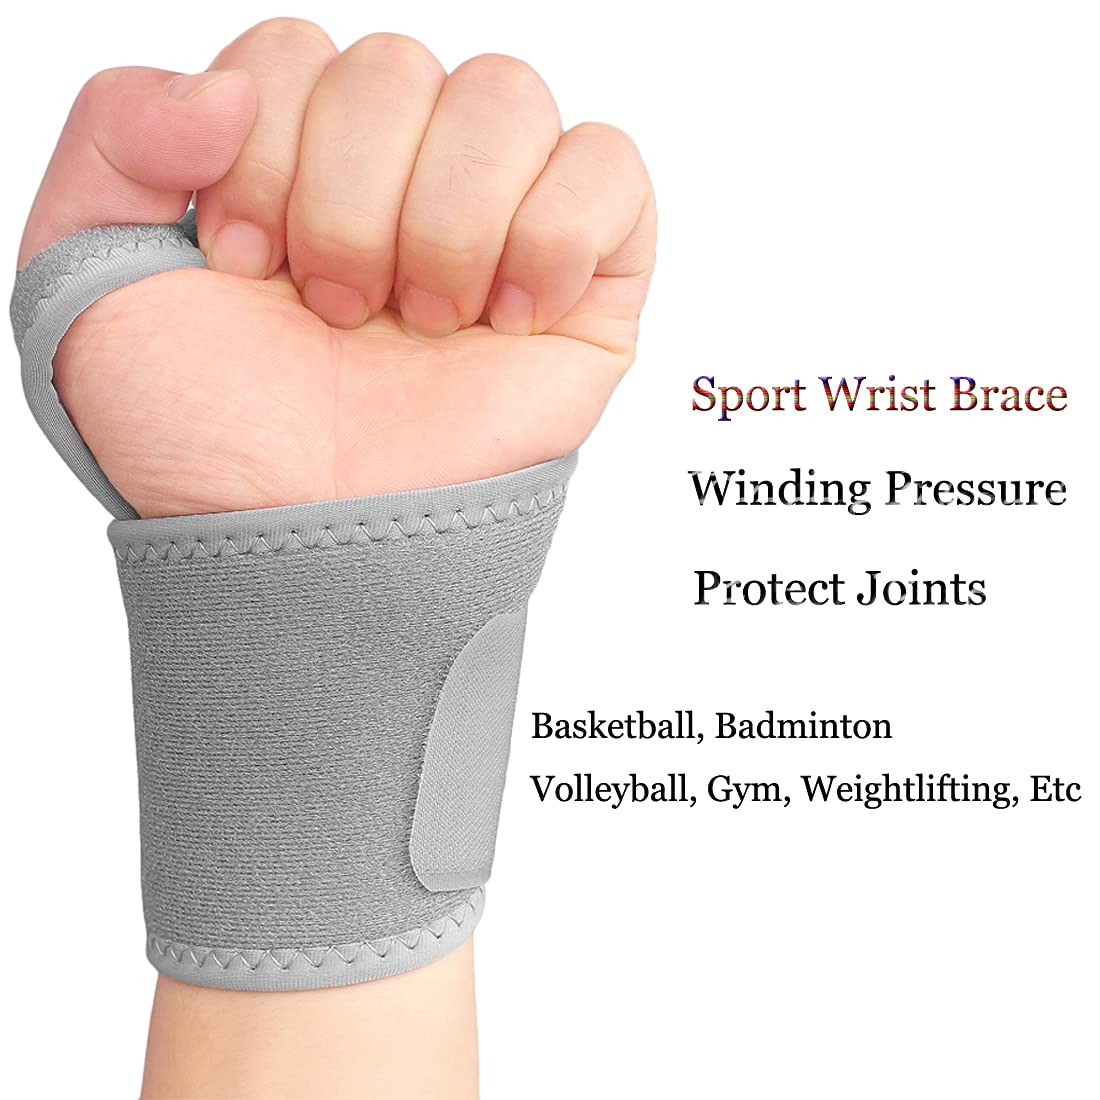 Wrist Support Brace/Carpal Tunnel/Hand Support, Adjustable for Arthritis and Tendinitis, Joint Pain Relief